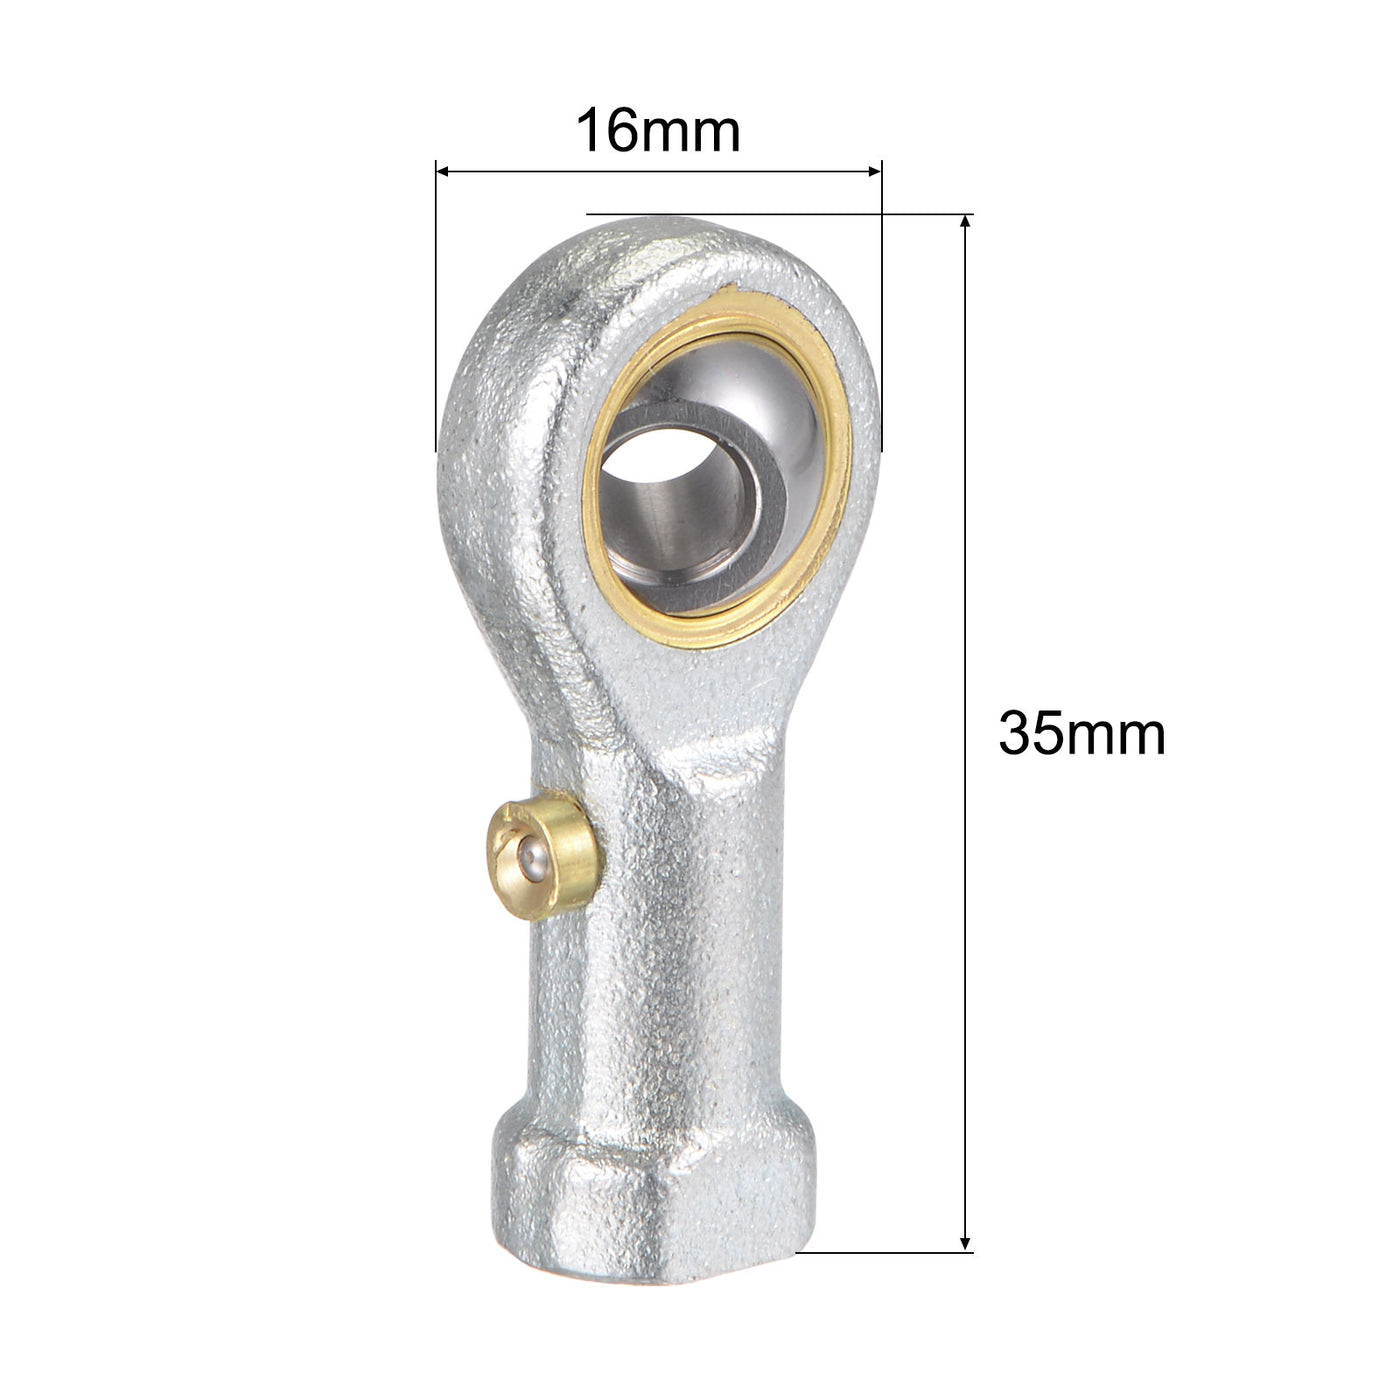 uxcell Uxcell PHS5 Rod End Bearing 5mm Bore Self-lubricated M5x0.8 Right Hand Female Thread